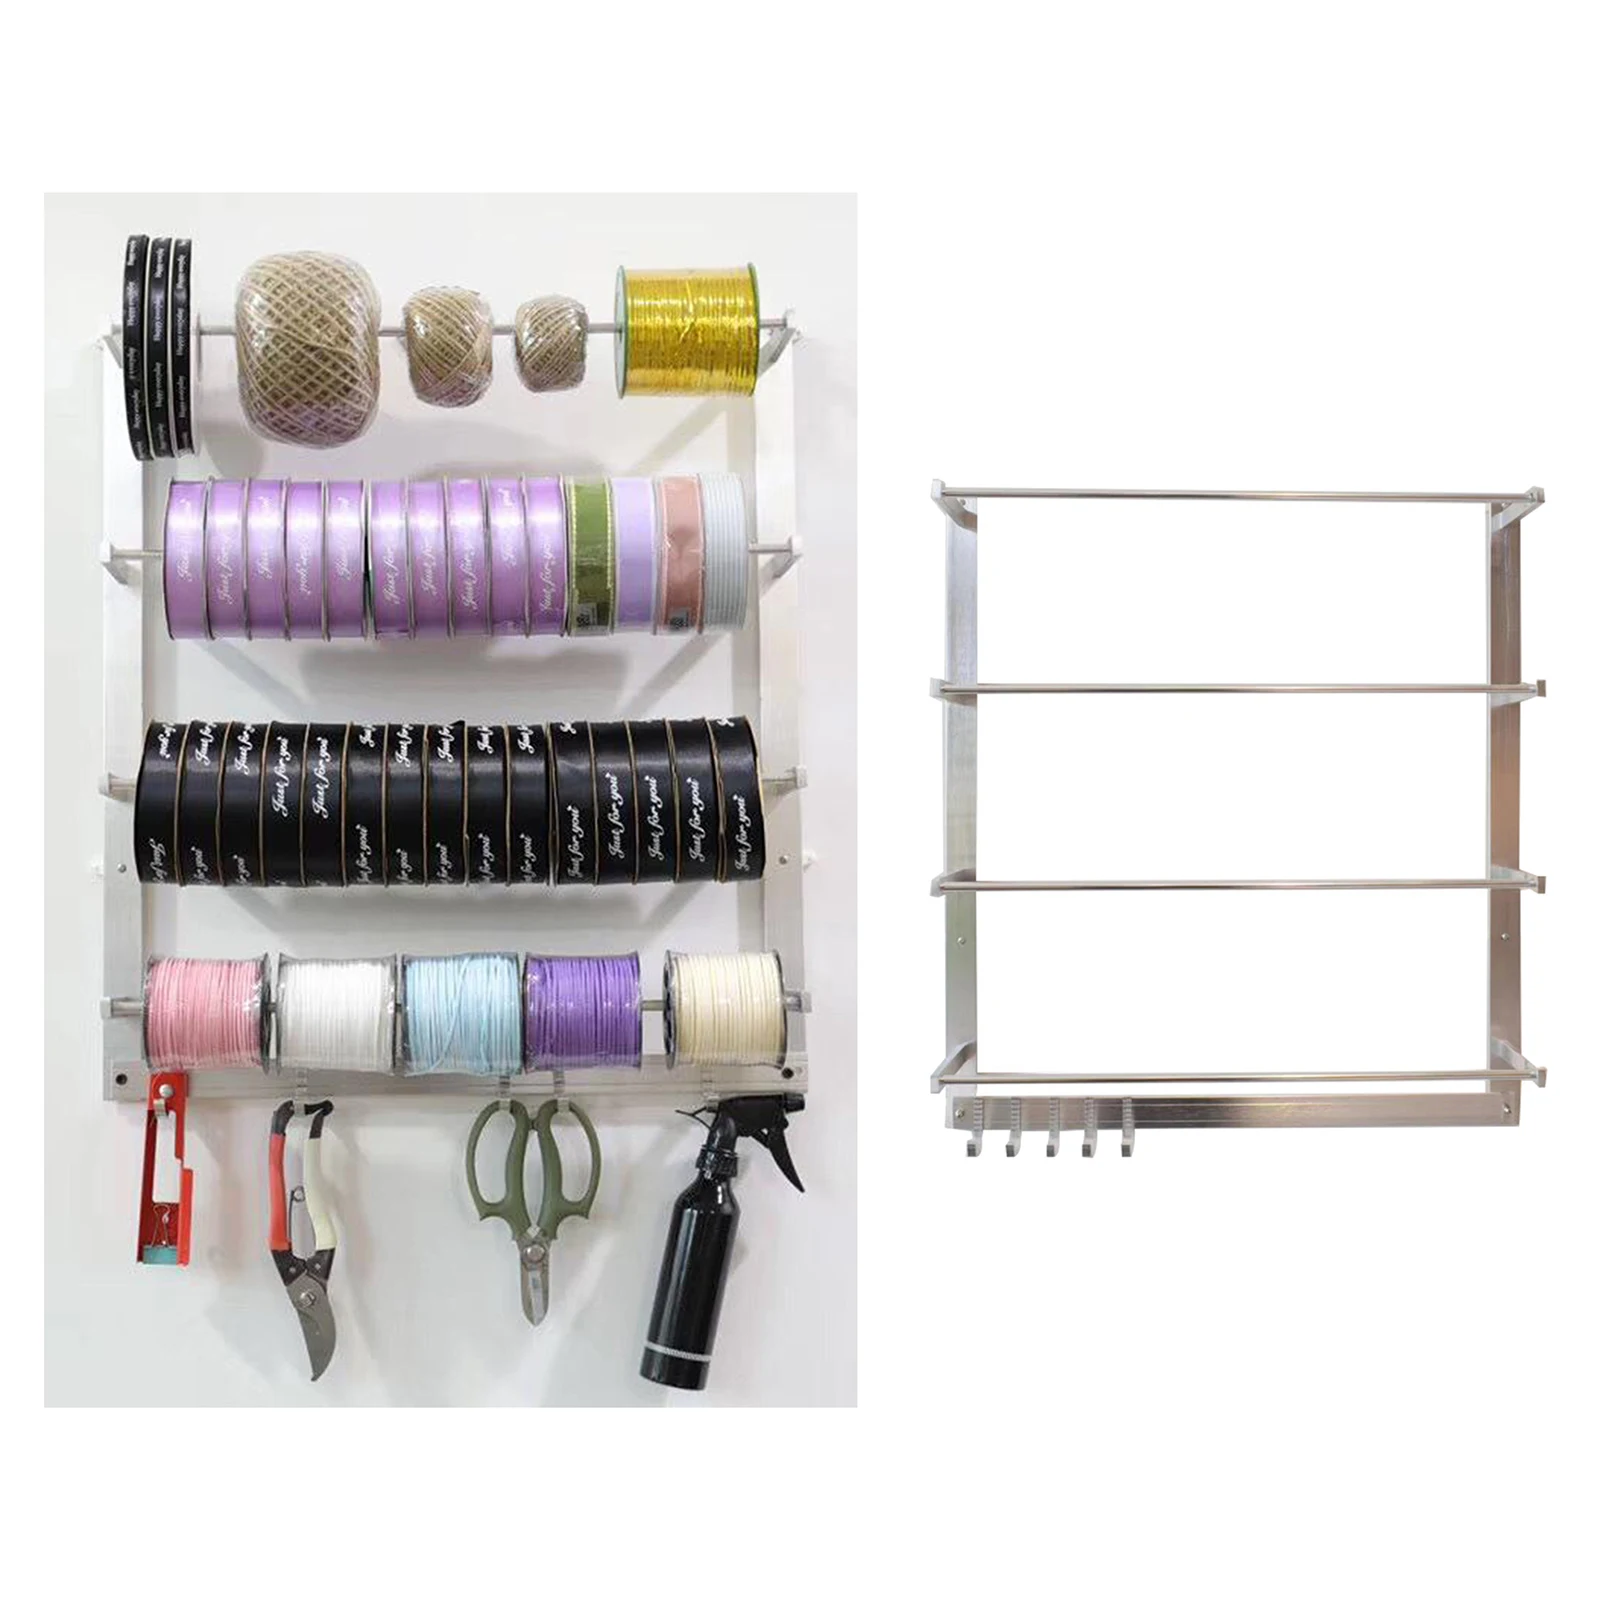 Durable Wire Spool Rack Wall Mounted Ribbon Organizer Key Holder for Home Sewing